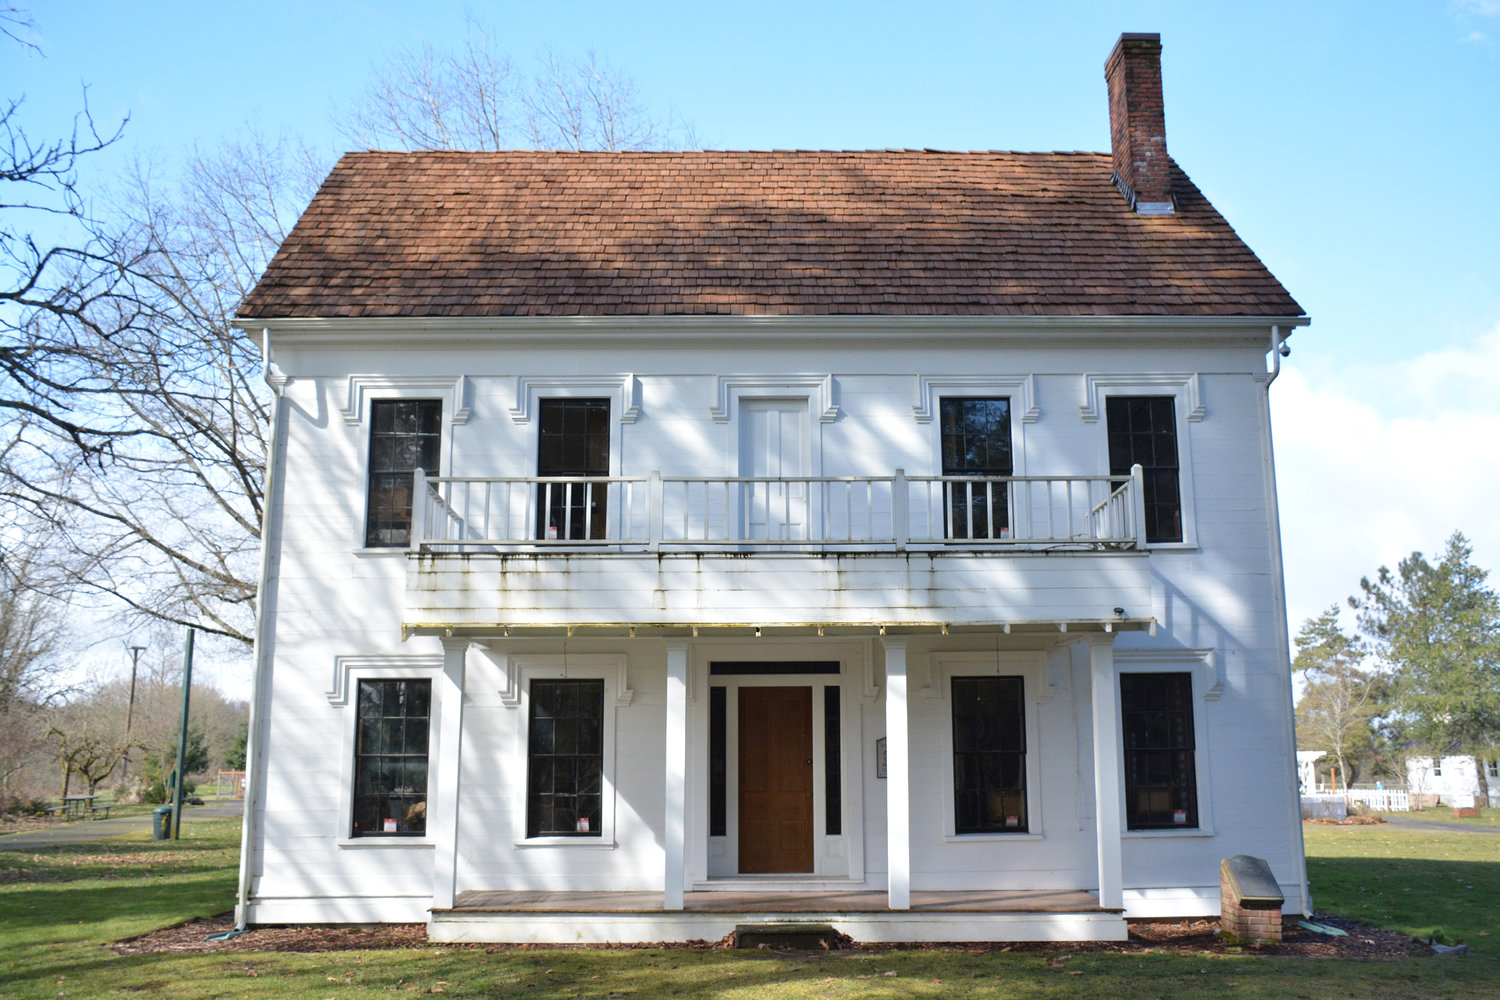 The Borst Home, one of the filming locations for “Maysville.”